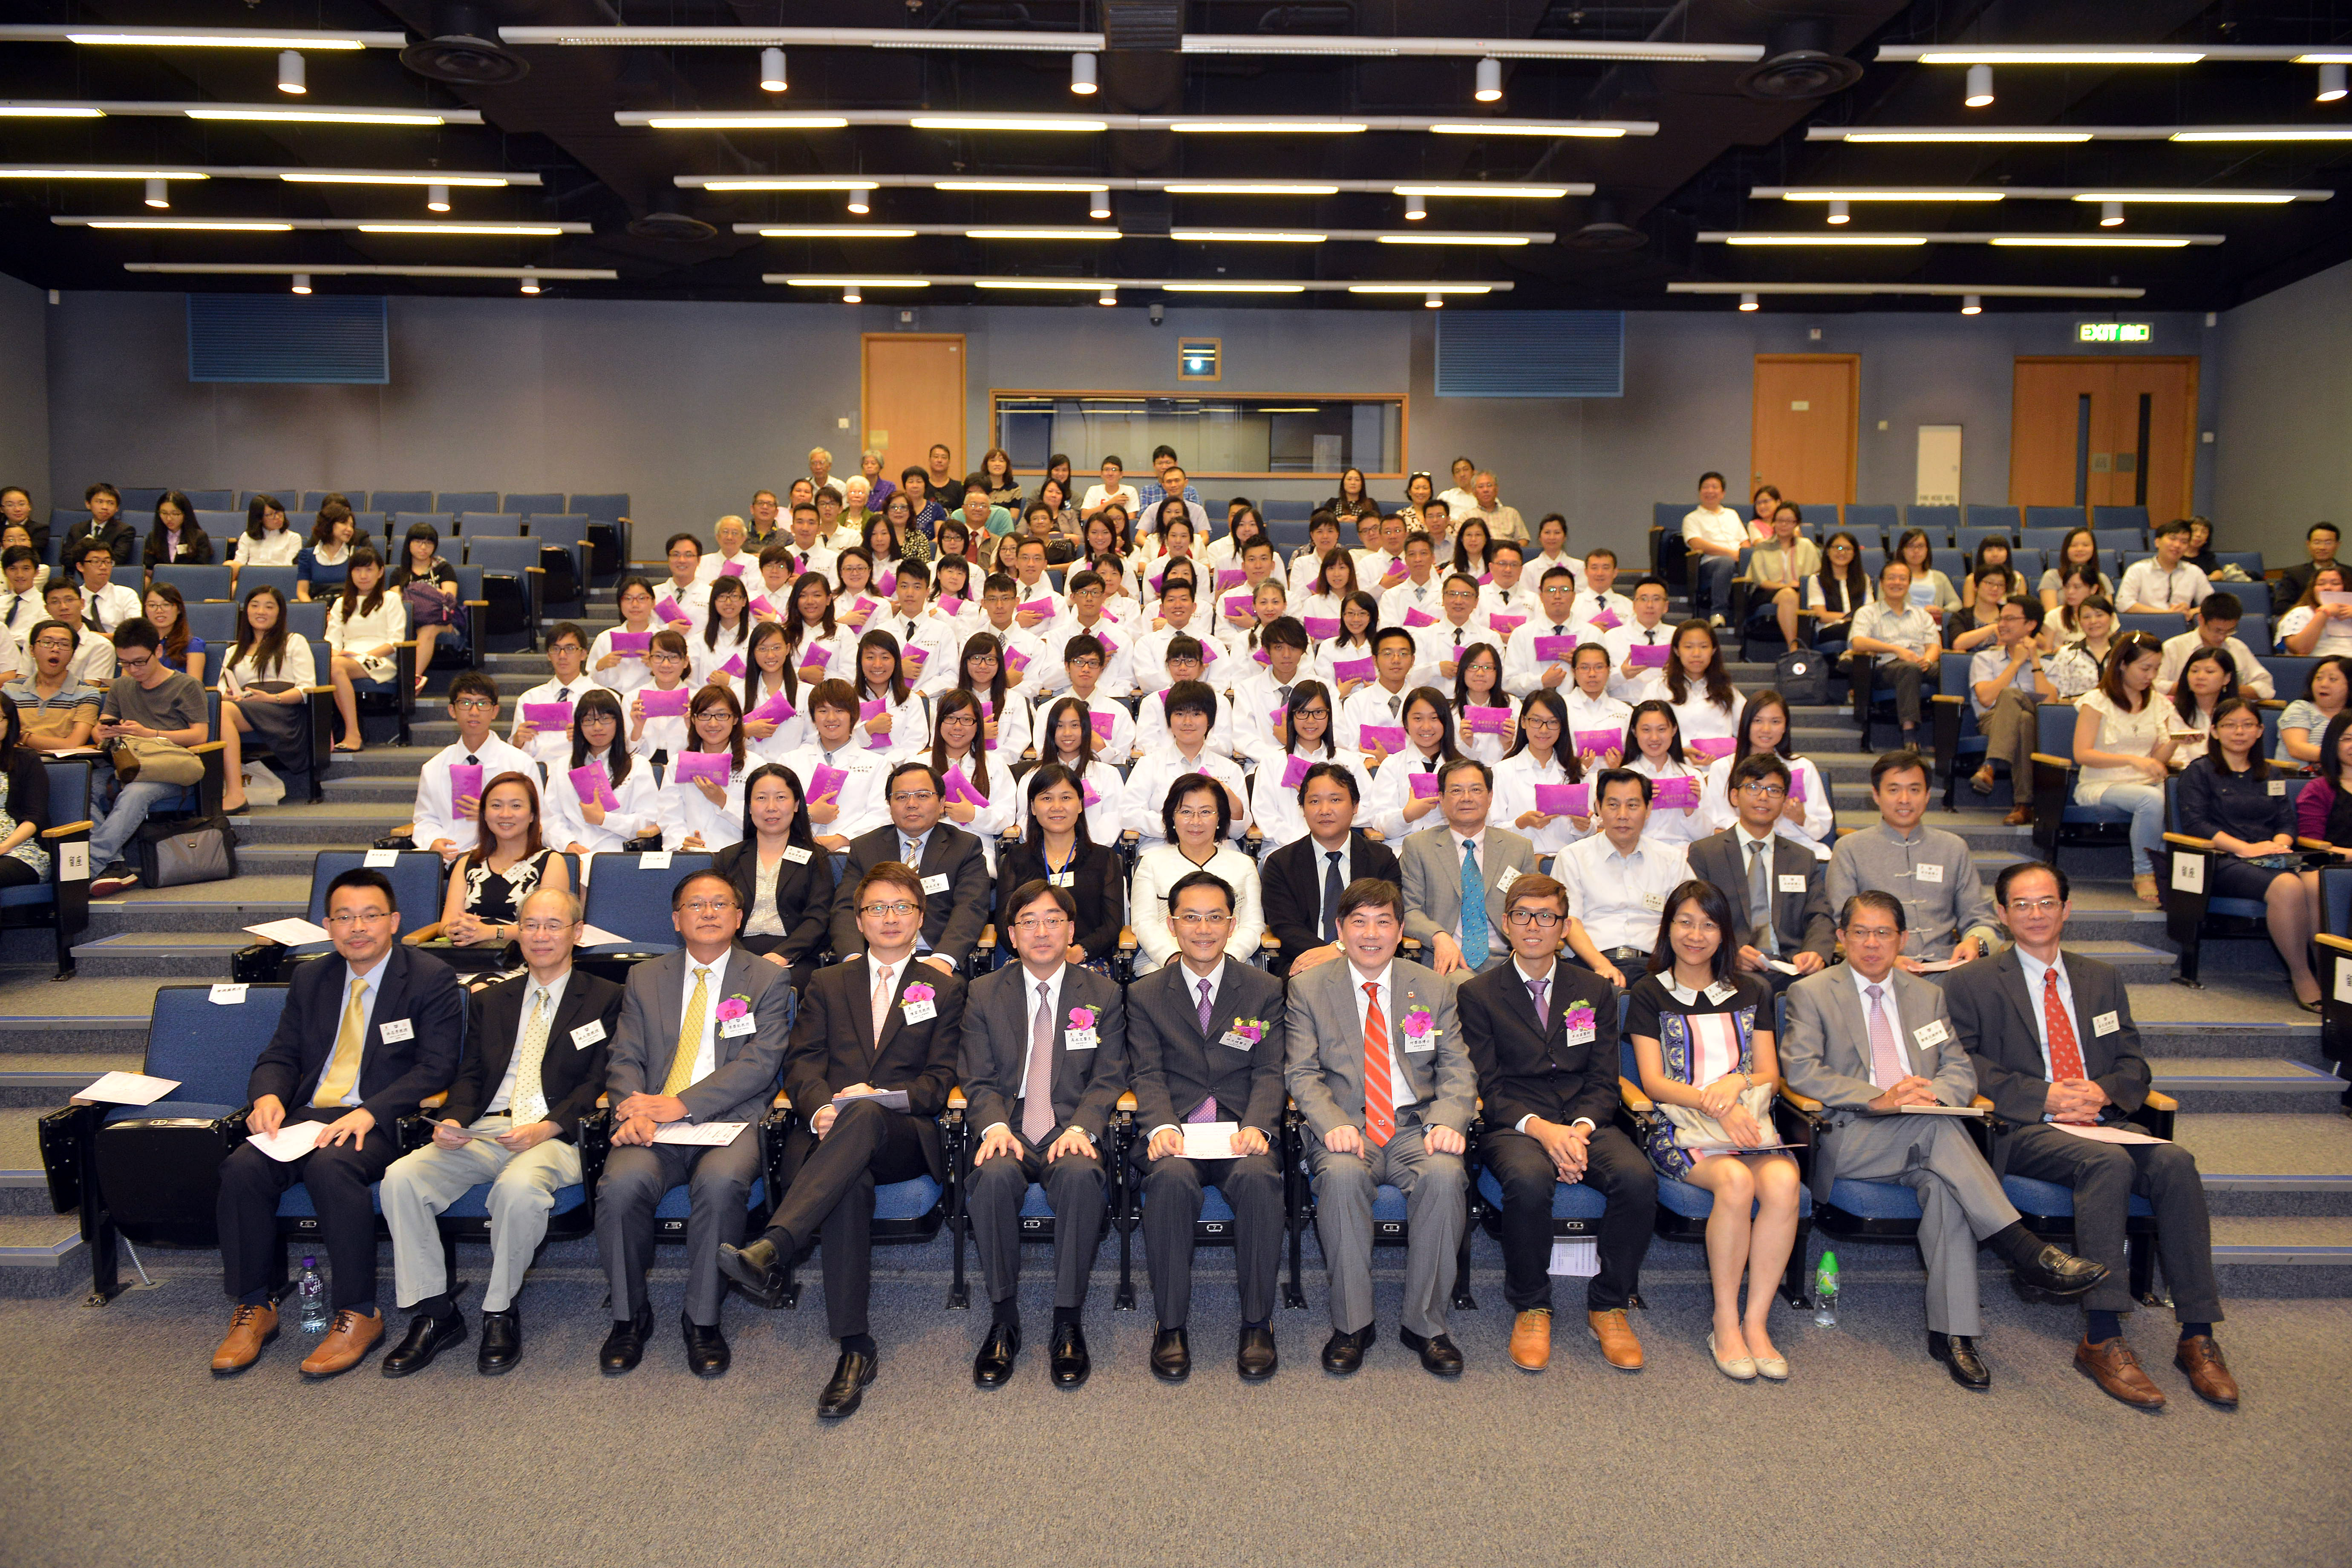 A group photo of Chinese medicine freshmen and guests at the White Coat Ceremony.